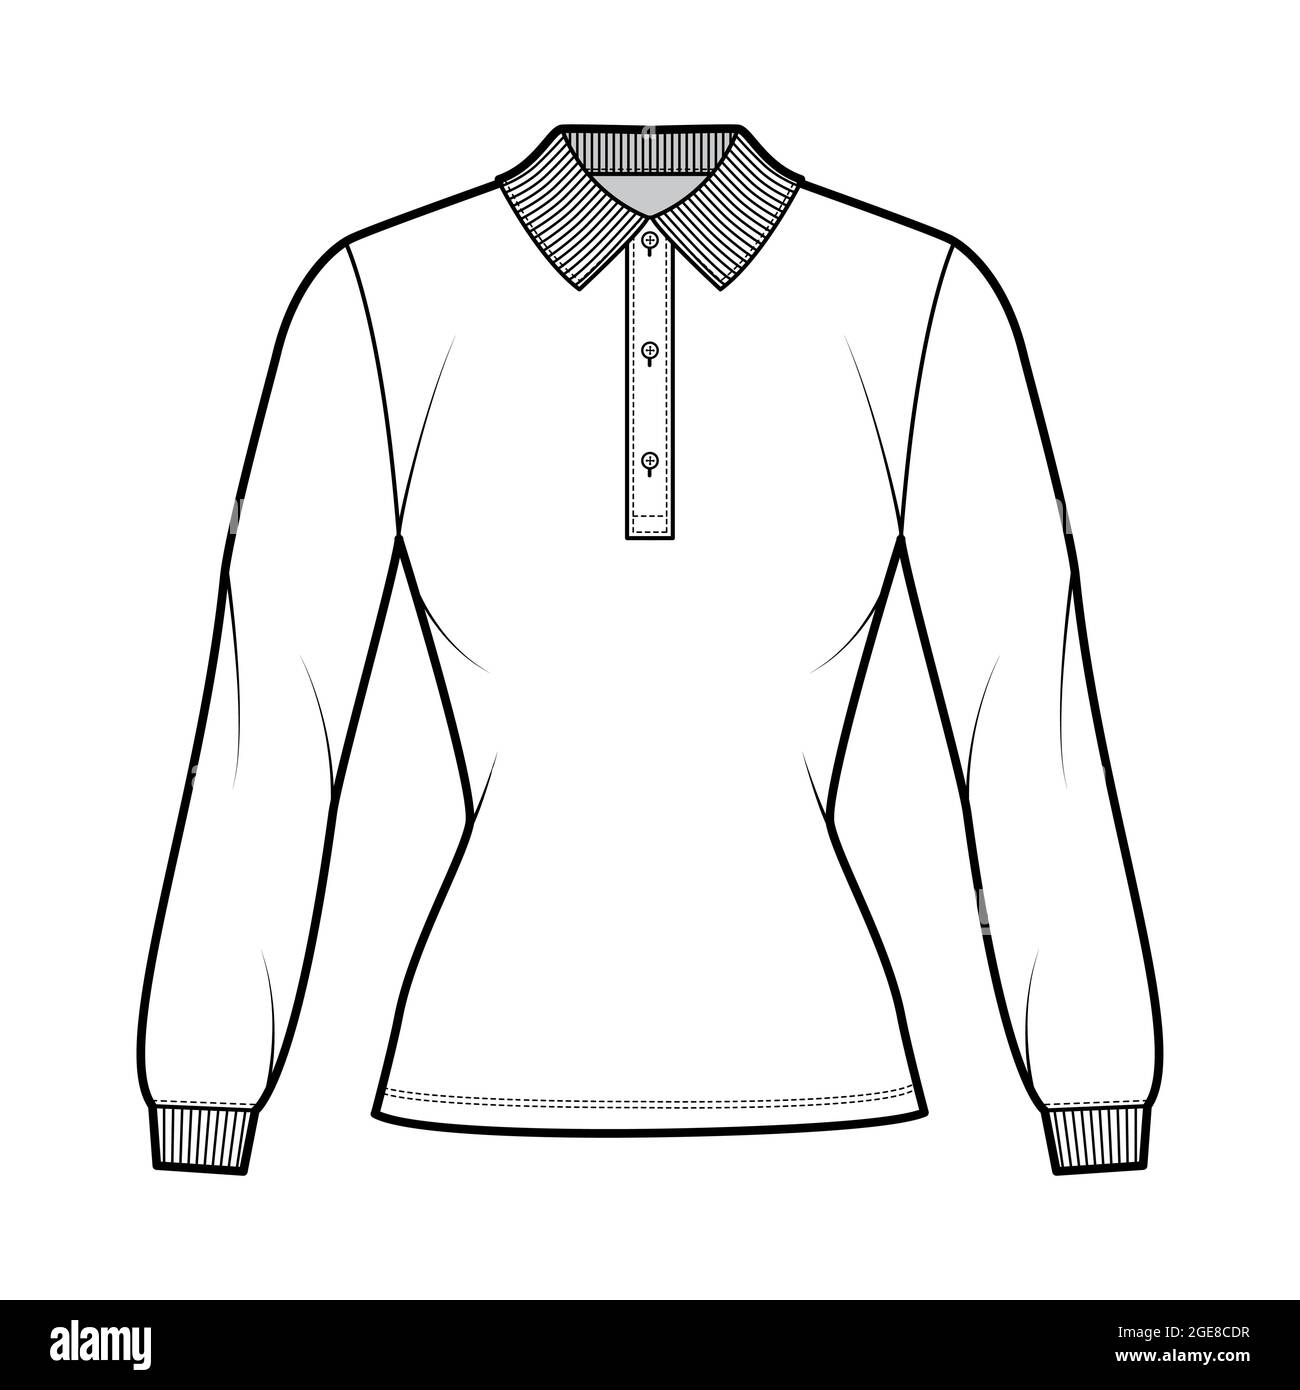 Shirt polo fitted body technical fashion illustration with long sleeves, tunic length, henley button neck, flat knit collar. Apparel top outwear template front white color. Women men unisex CAD mockup Stock Vector